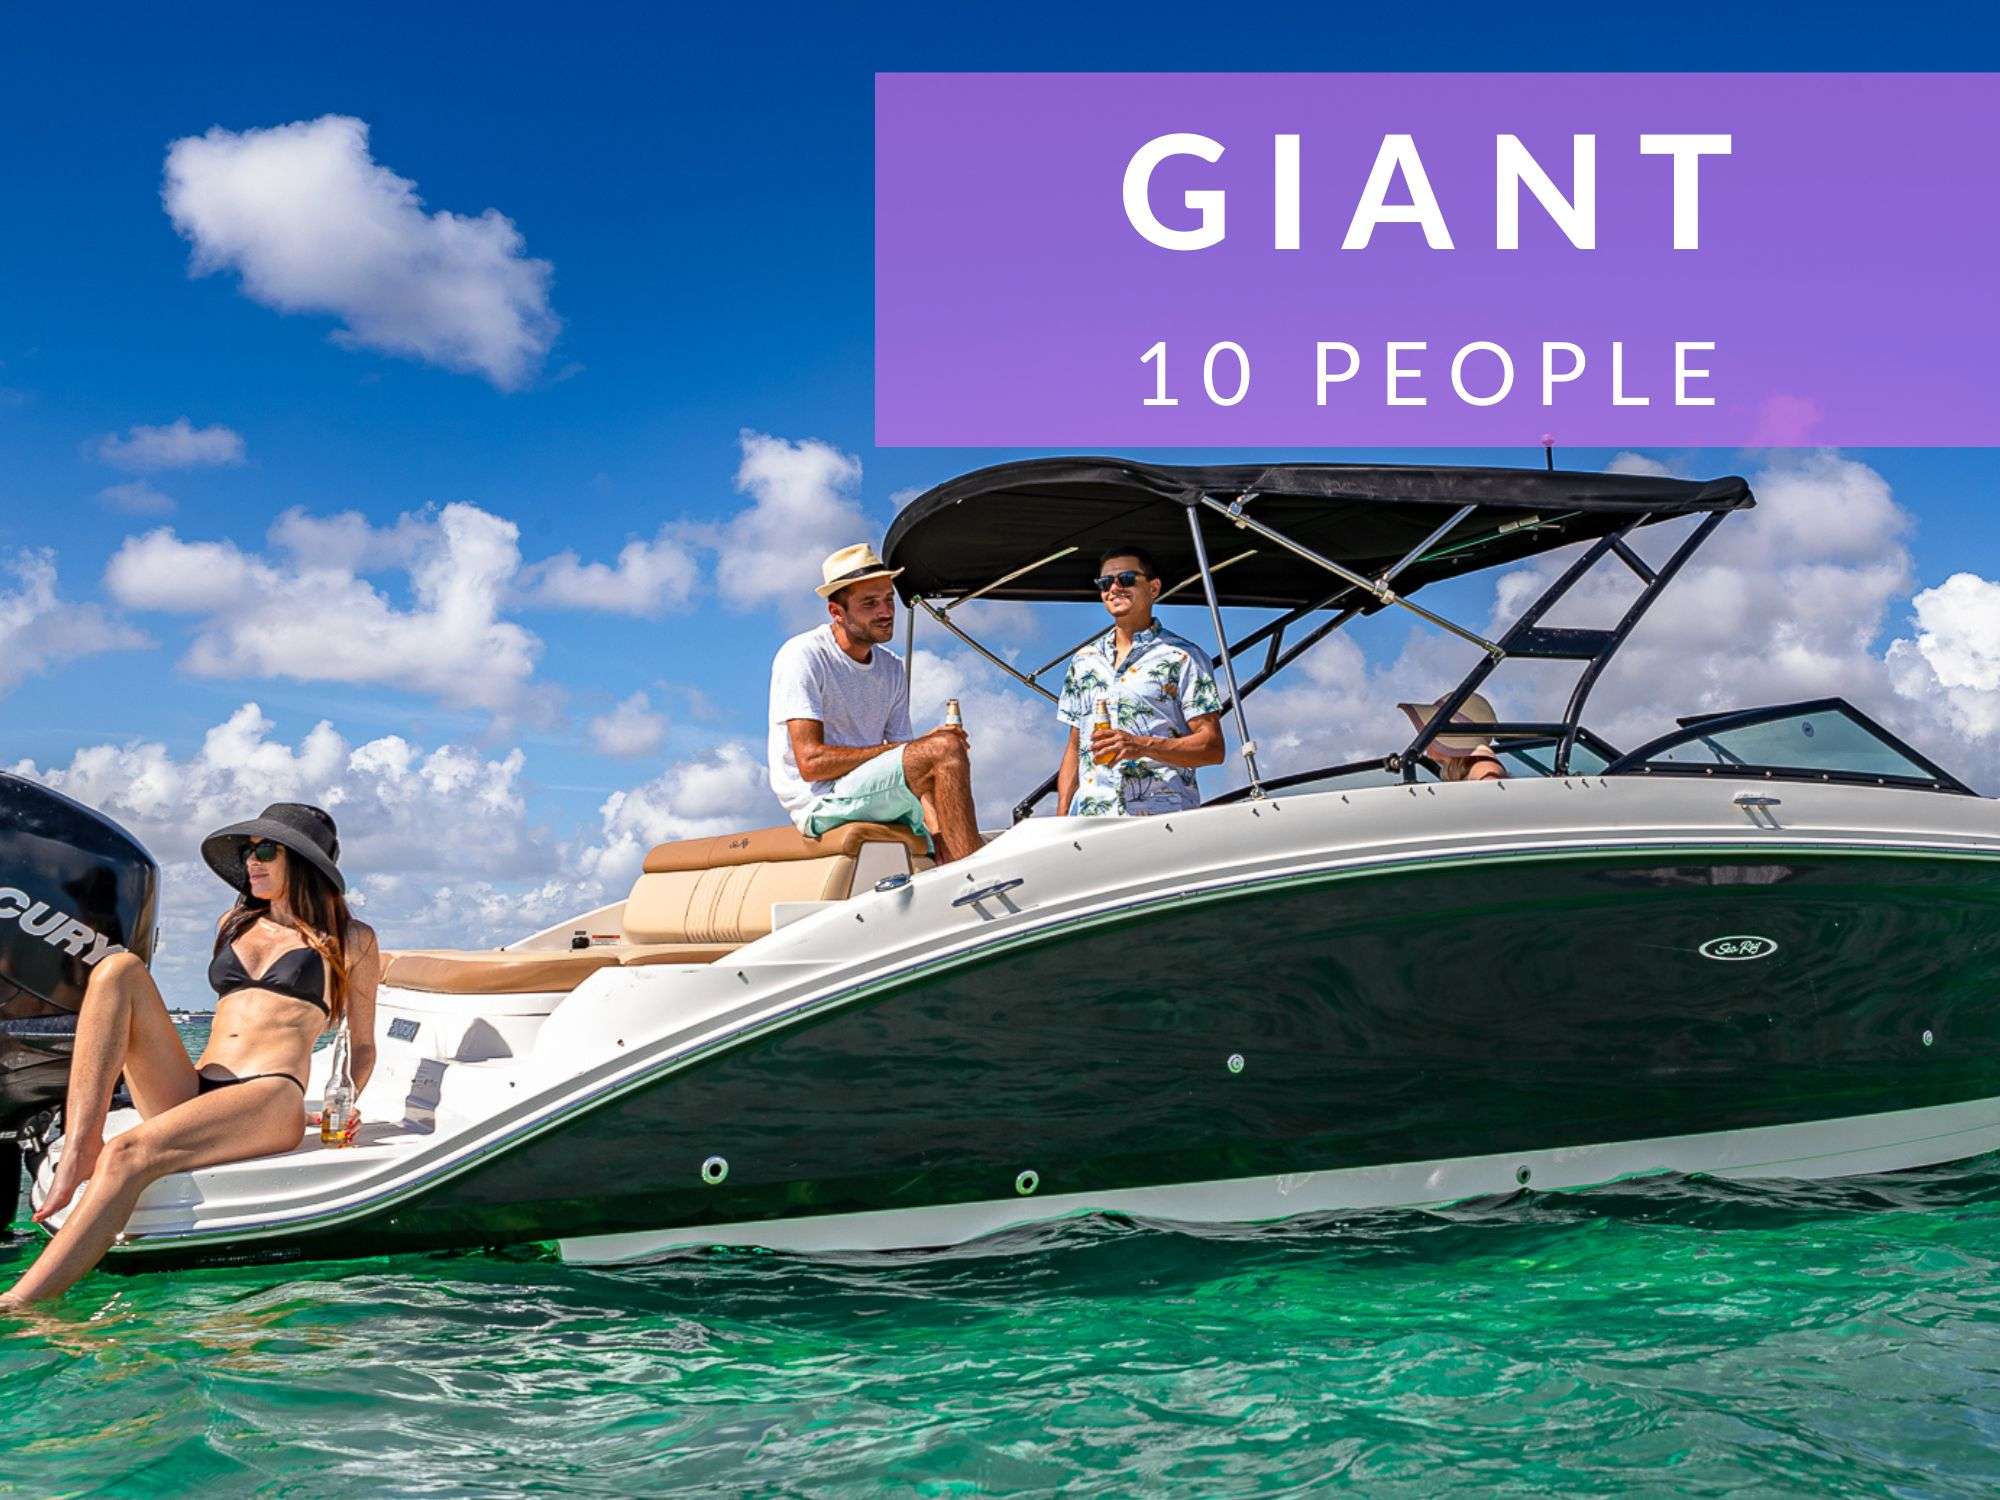 RENT A BOAT FOR 10 PEOPLE IN MIAMI